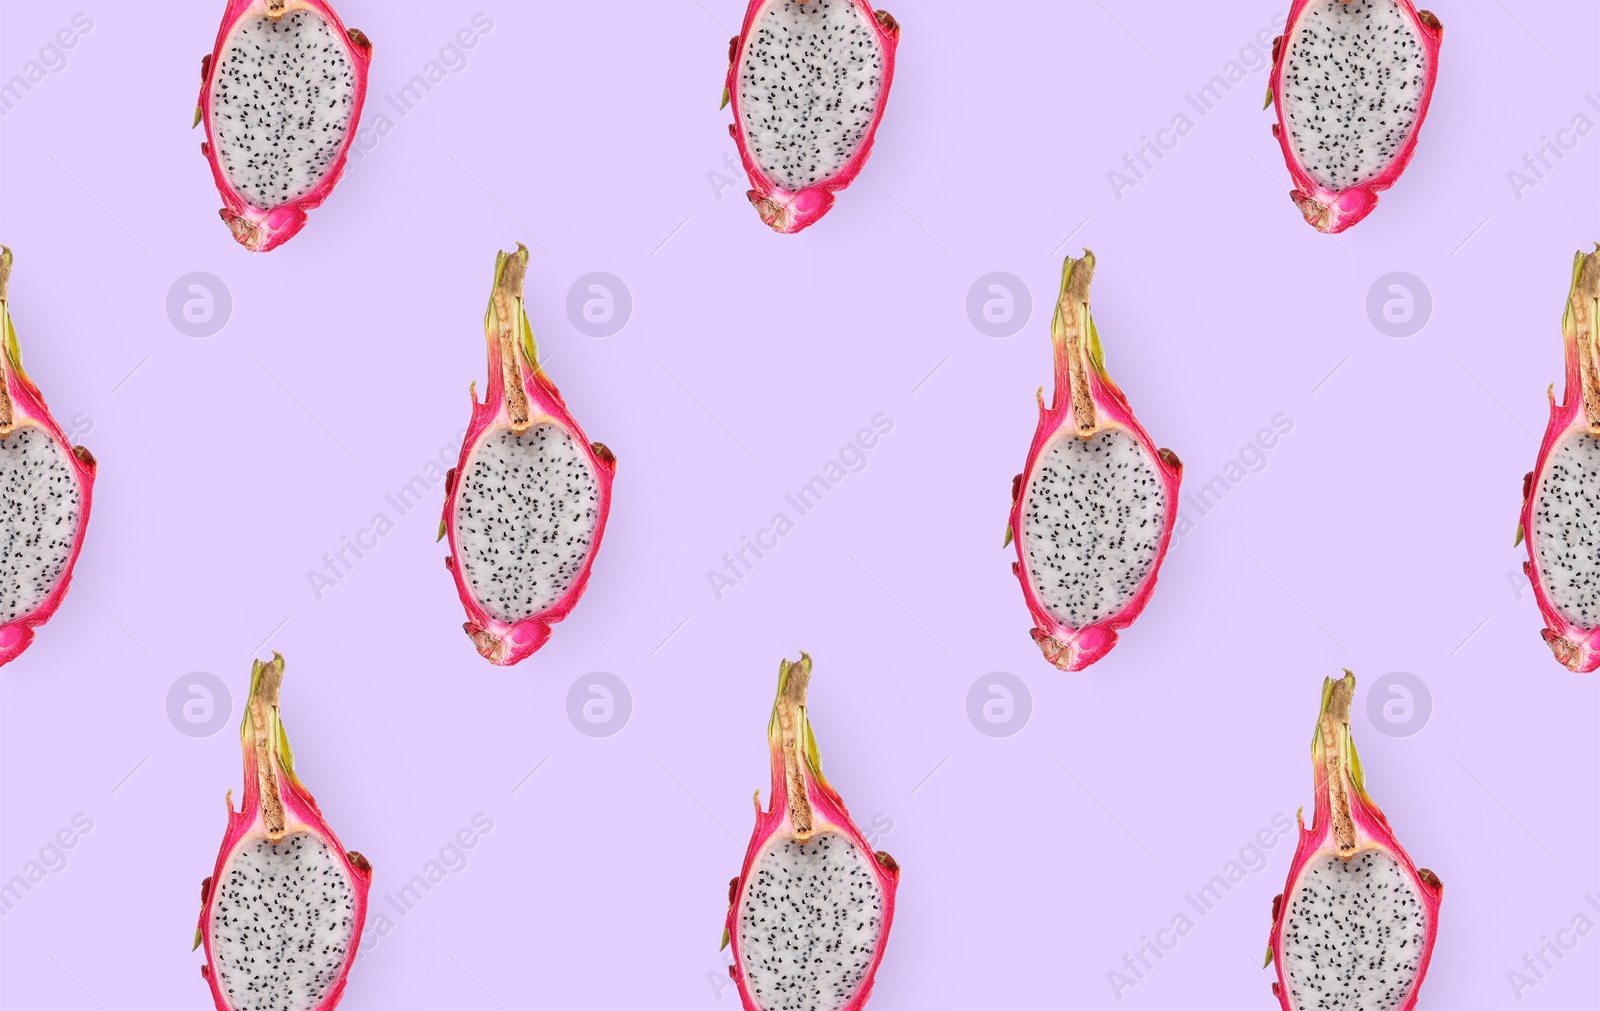 Image of Cut delicious exotic dragon fruits on lilac background, flat lay